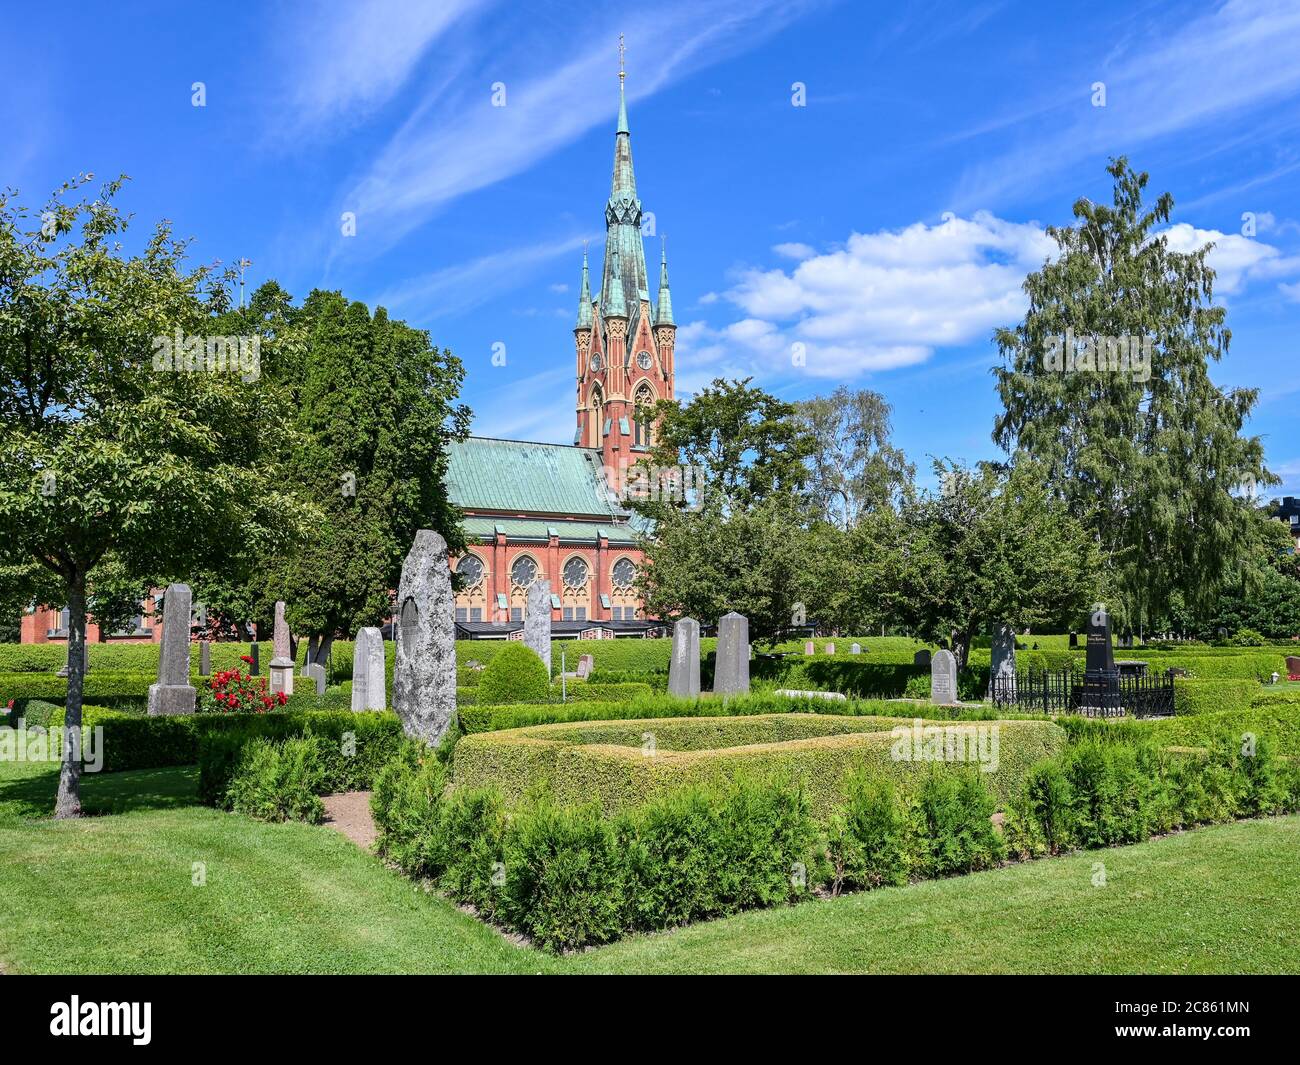 The Matteus church and its churchyard Norrkoping, Sweden. The church located in Folkparken, a city park of Norrkoping, was opened in 1892. Stock Photo